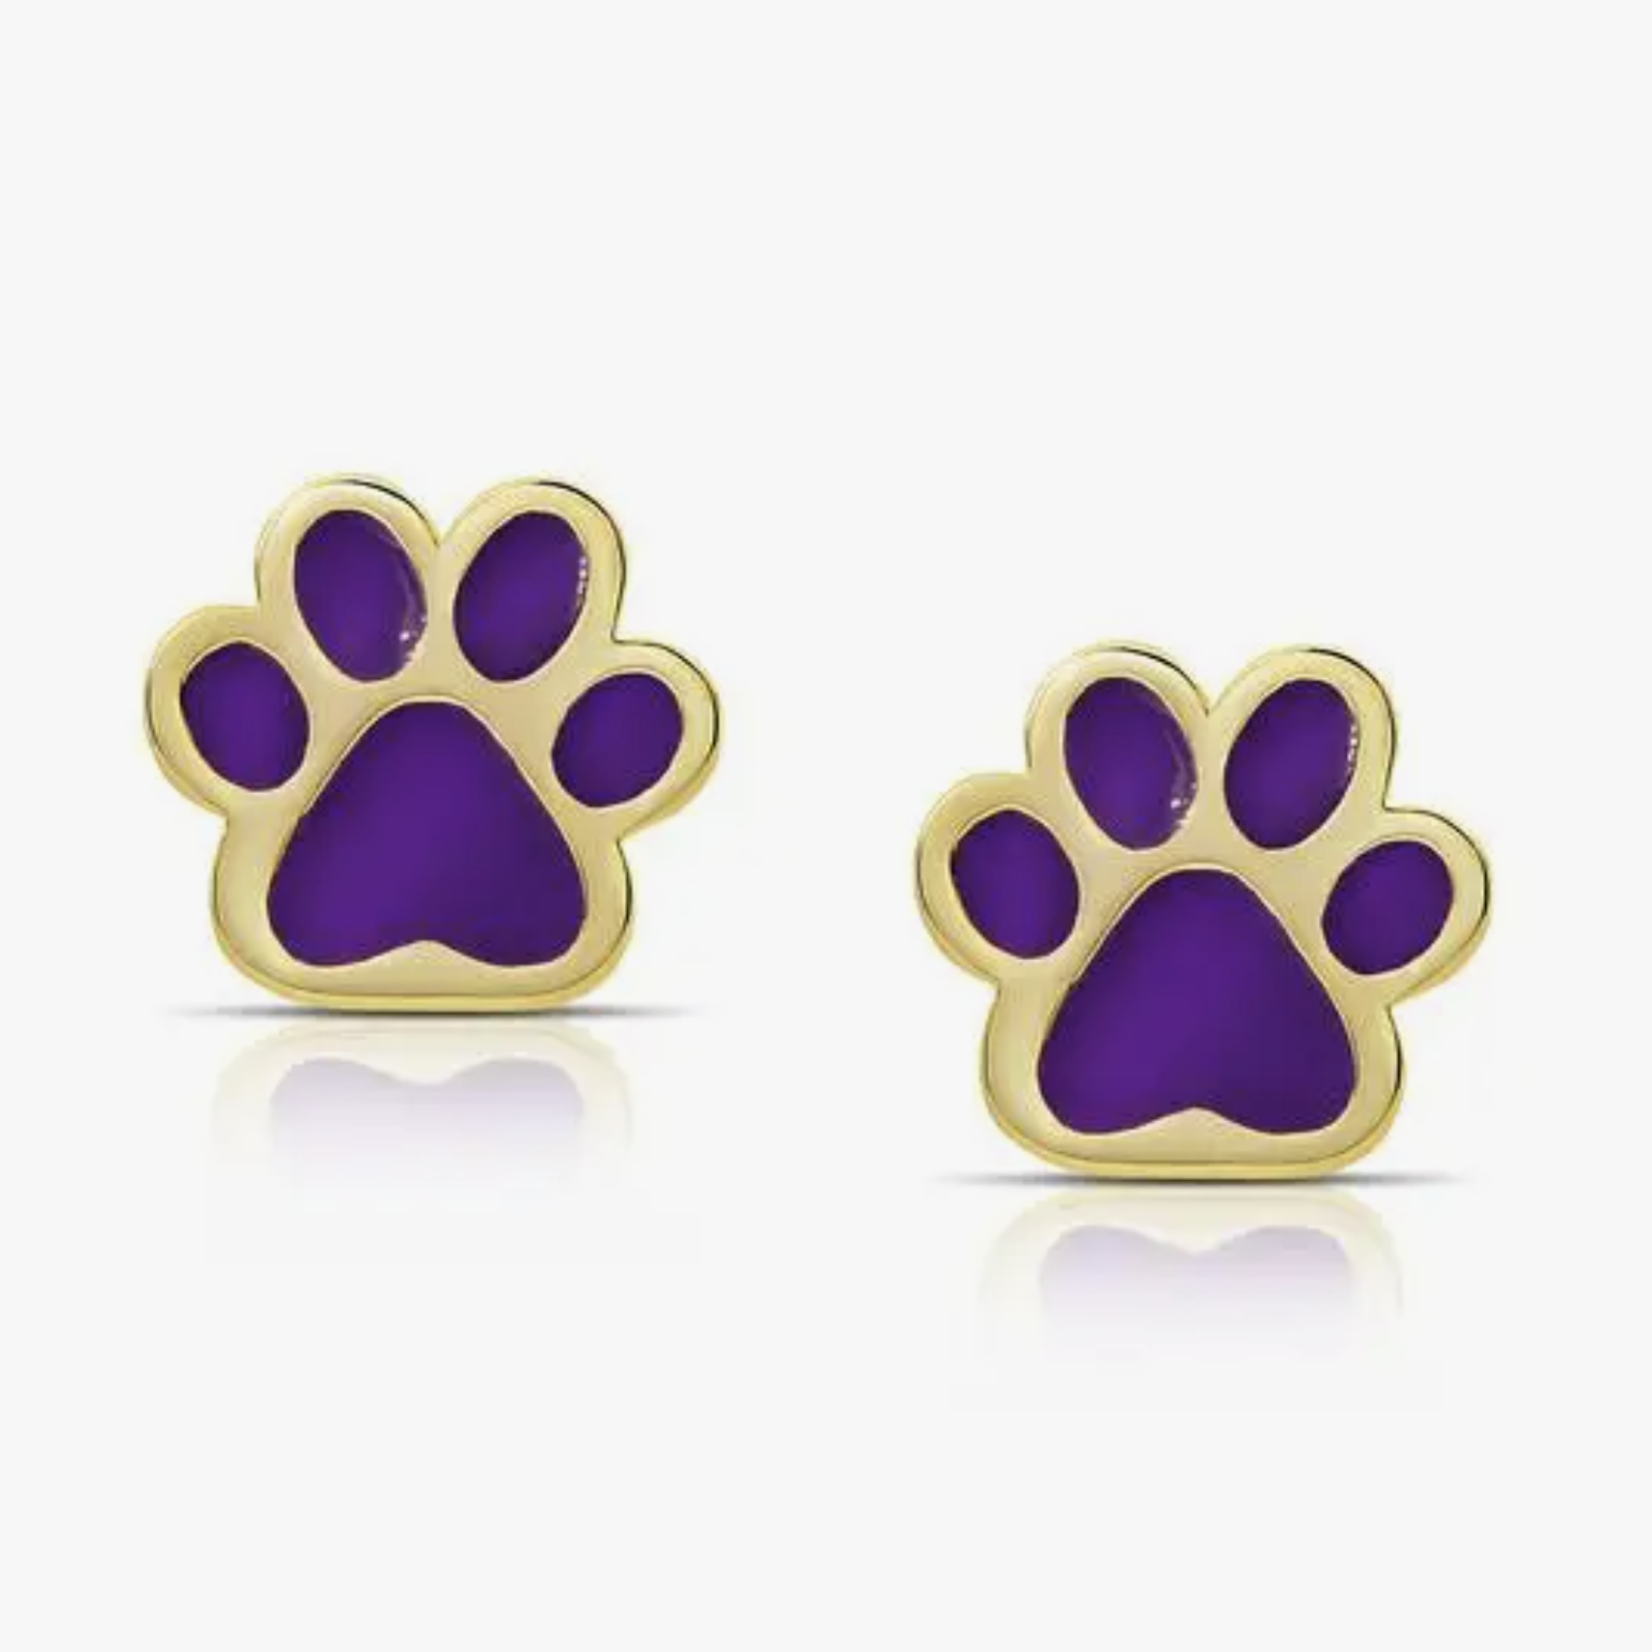 Lily Nilly - 18K Gold Earrings Purple Paw Stud